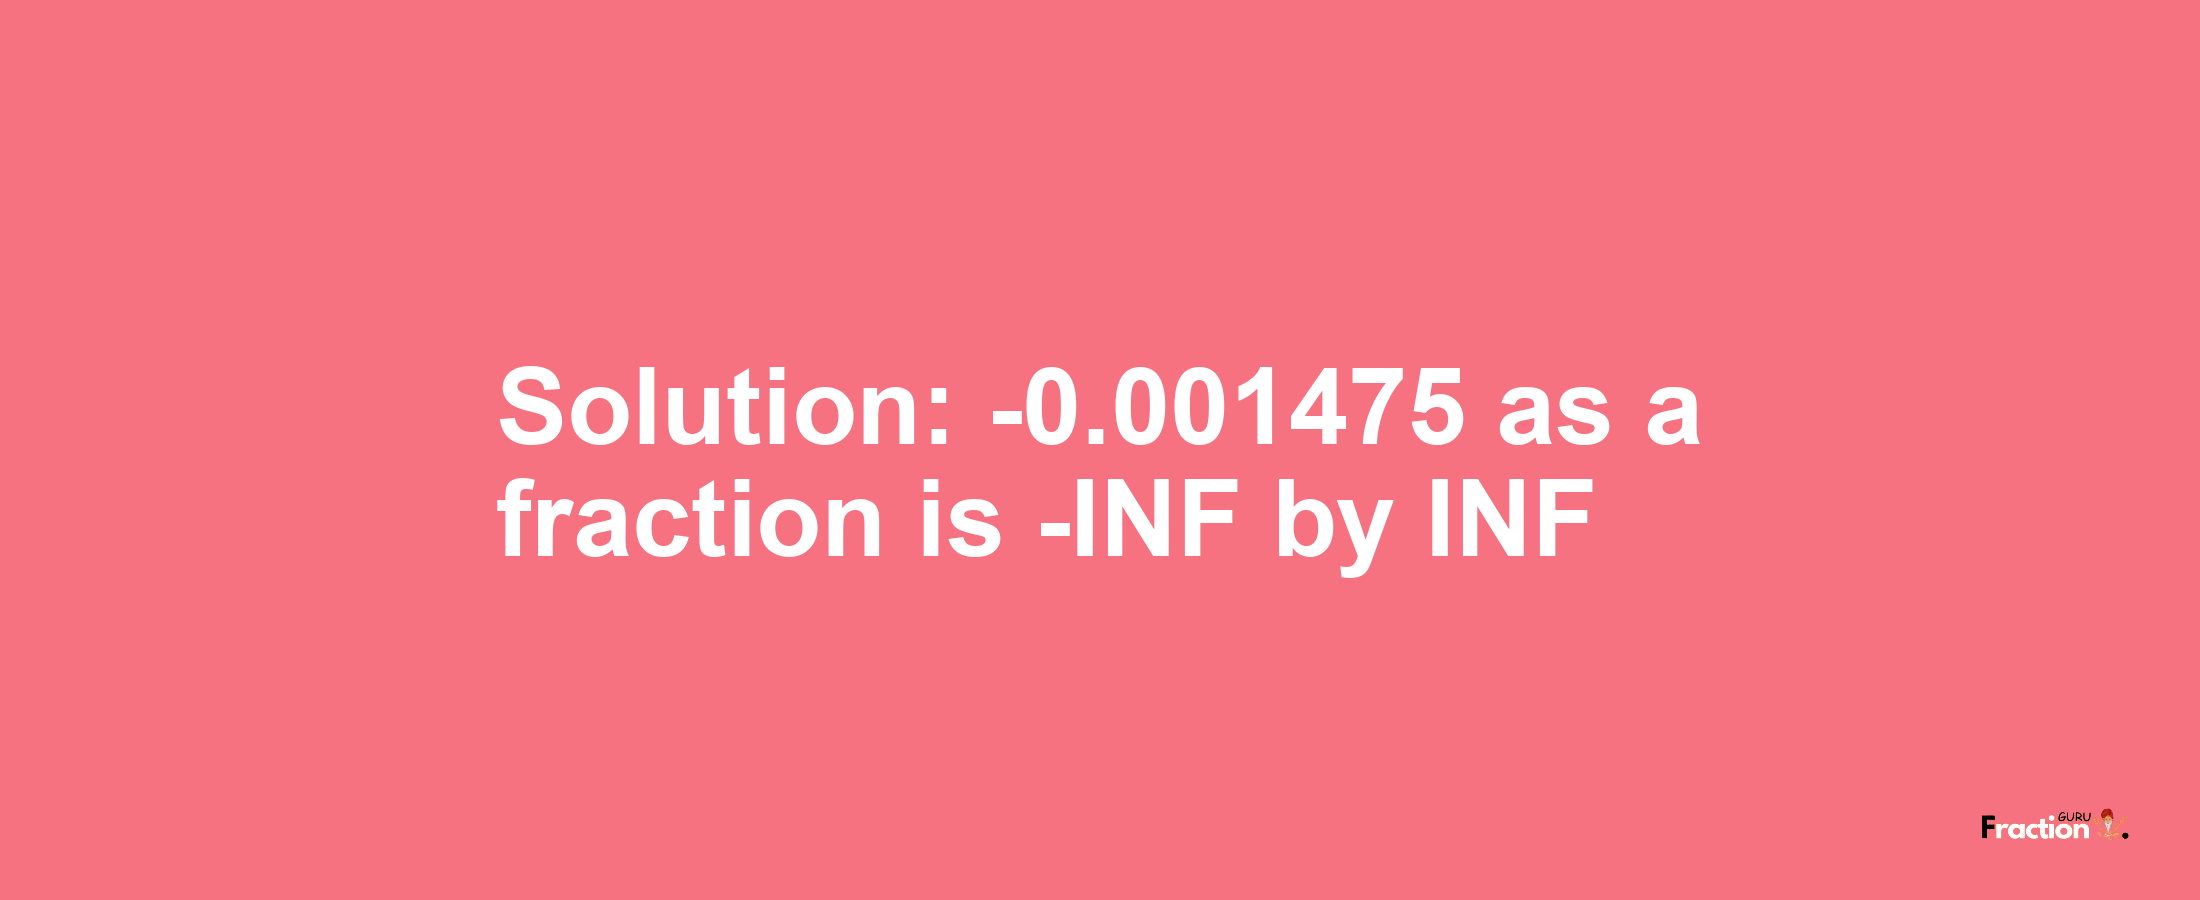 Solution:-0.001475 as a fraction is -INF/INF